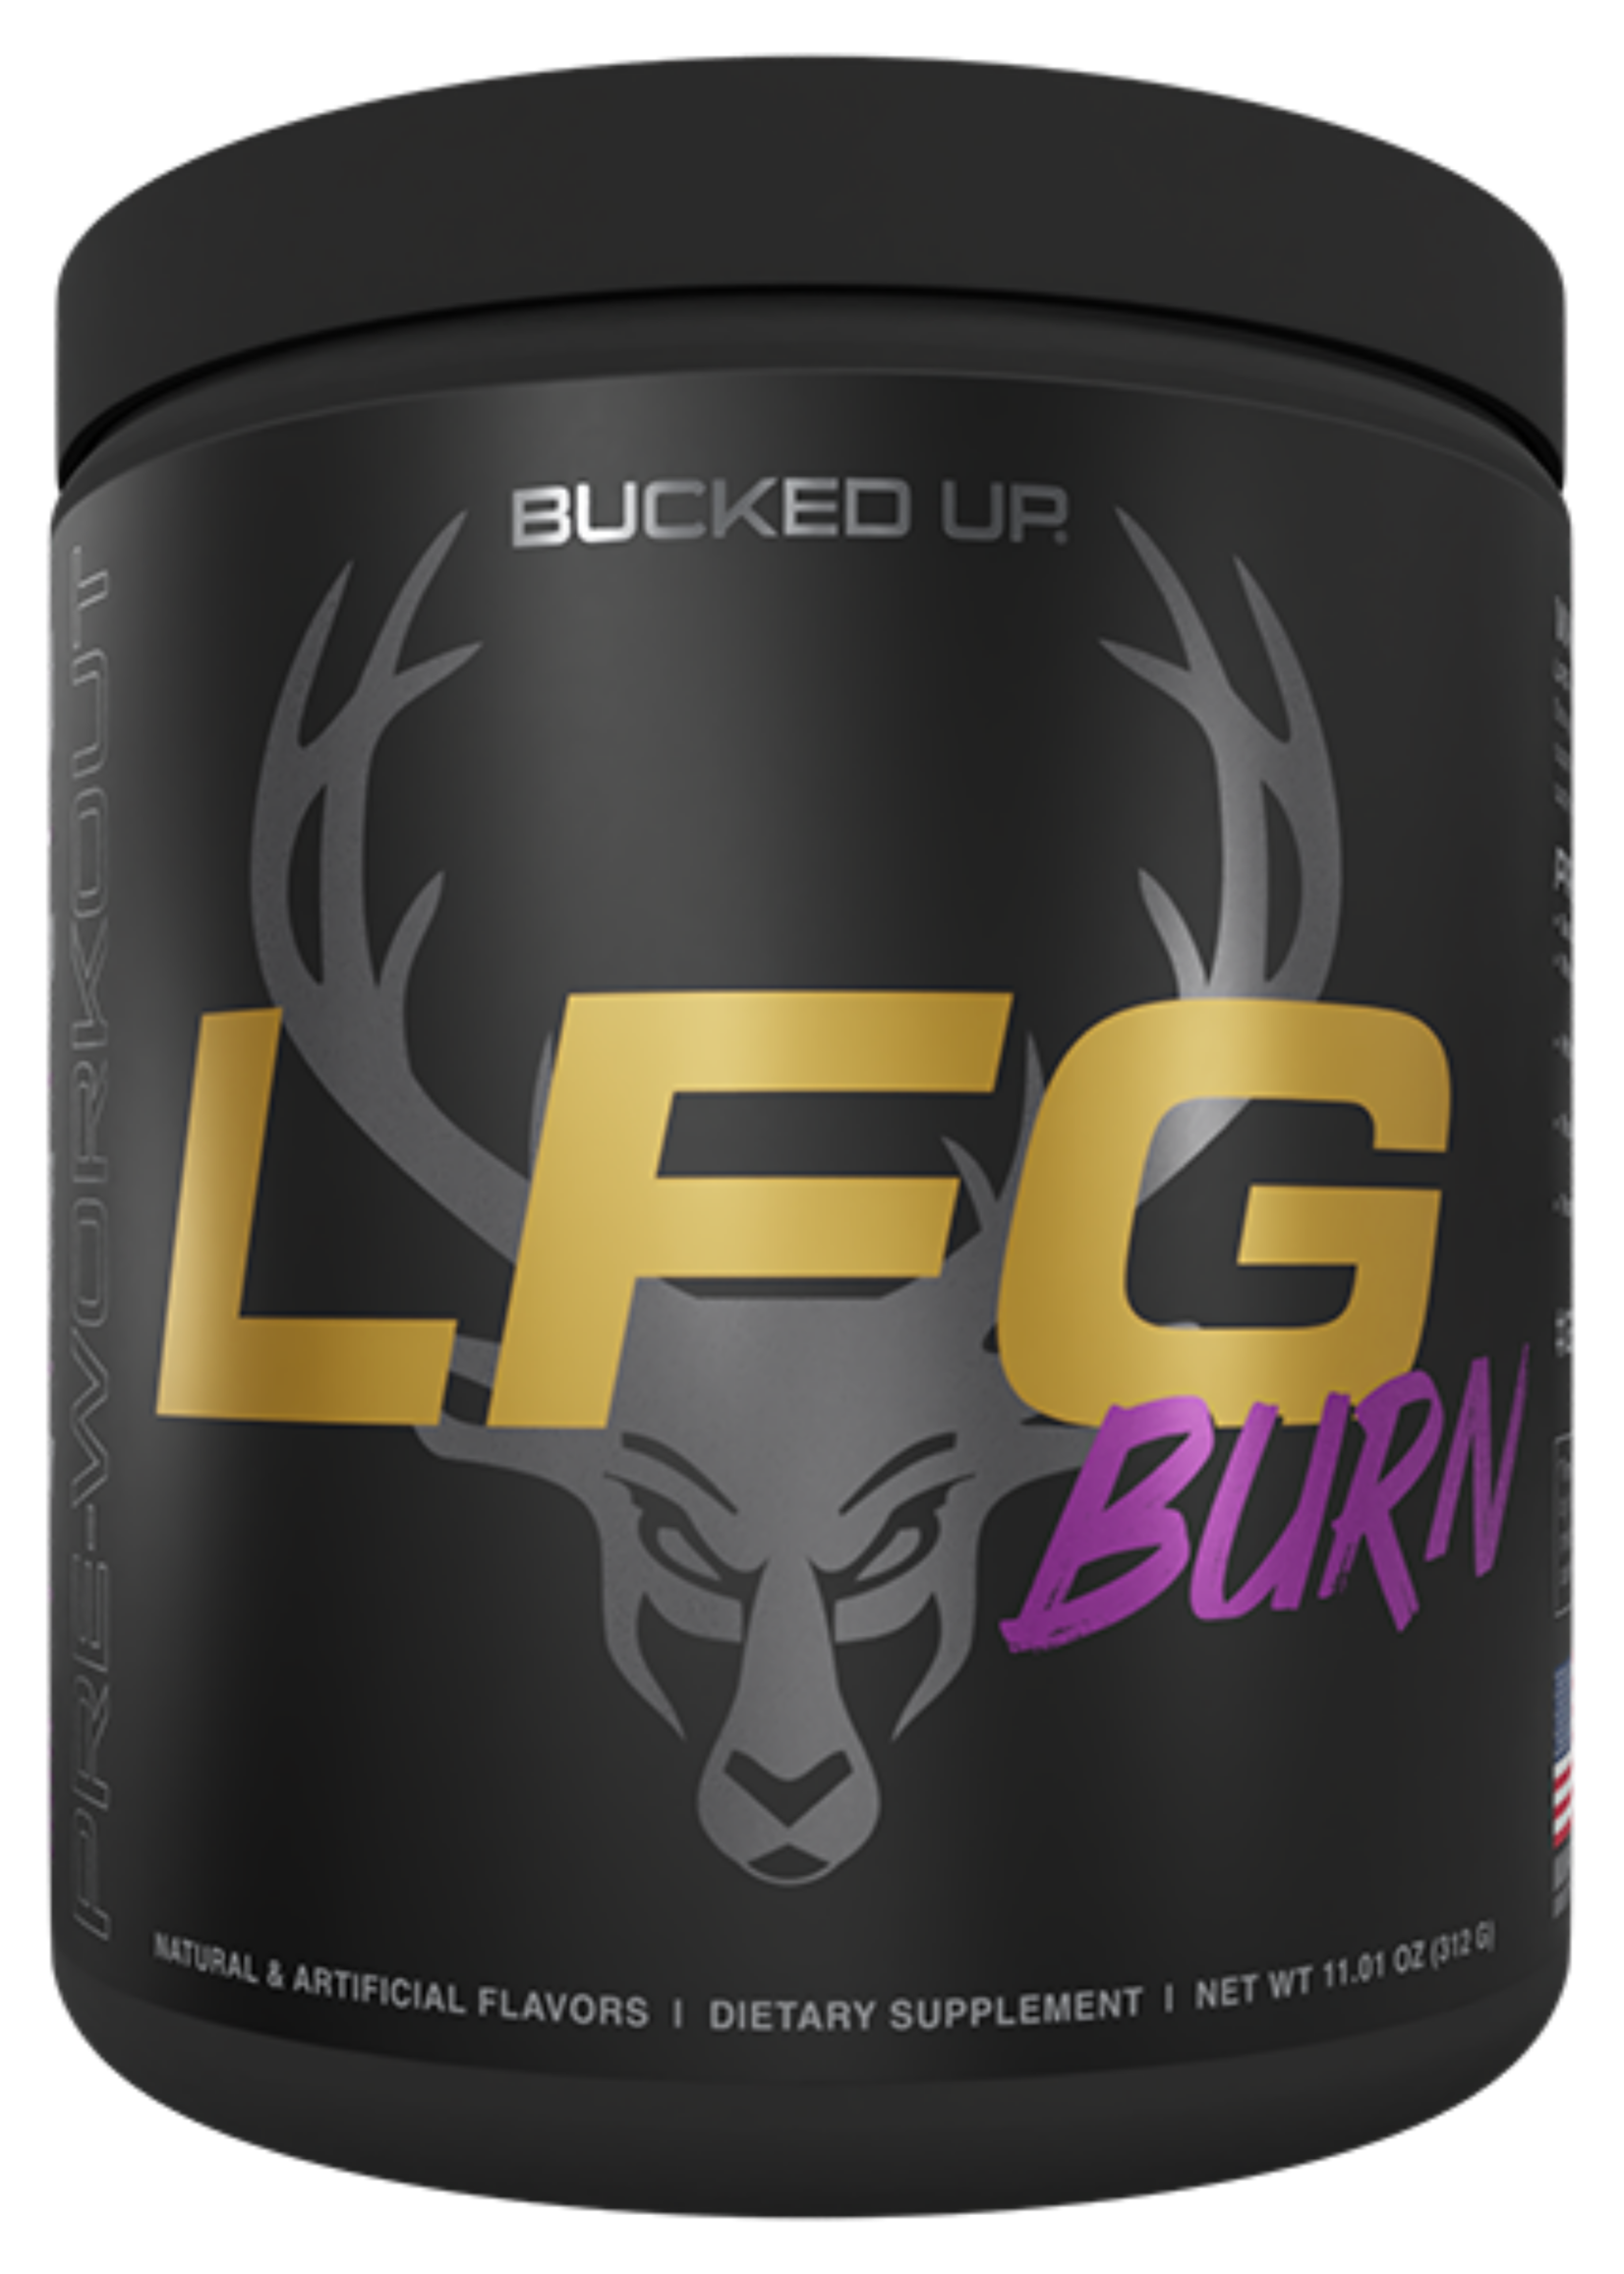 Bucked Up Bucked Up LFG Pre-Workout